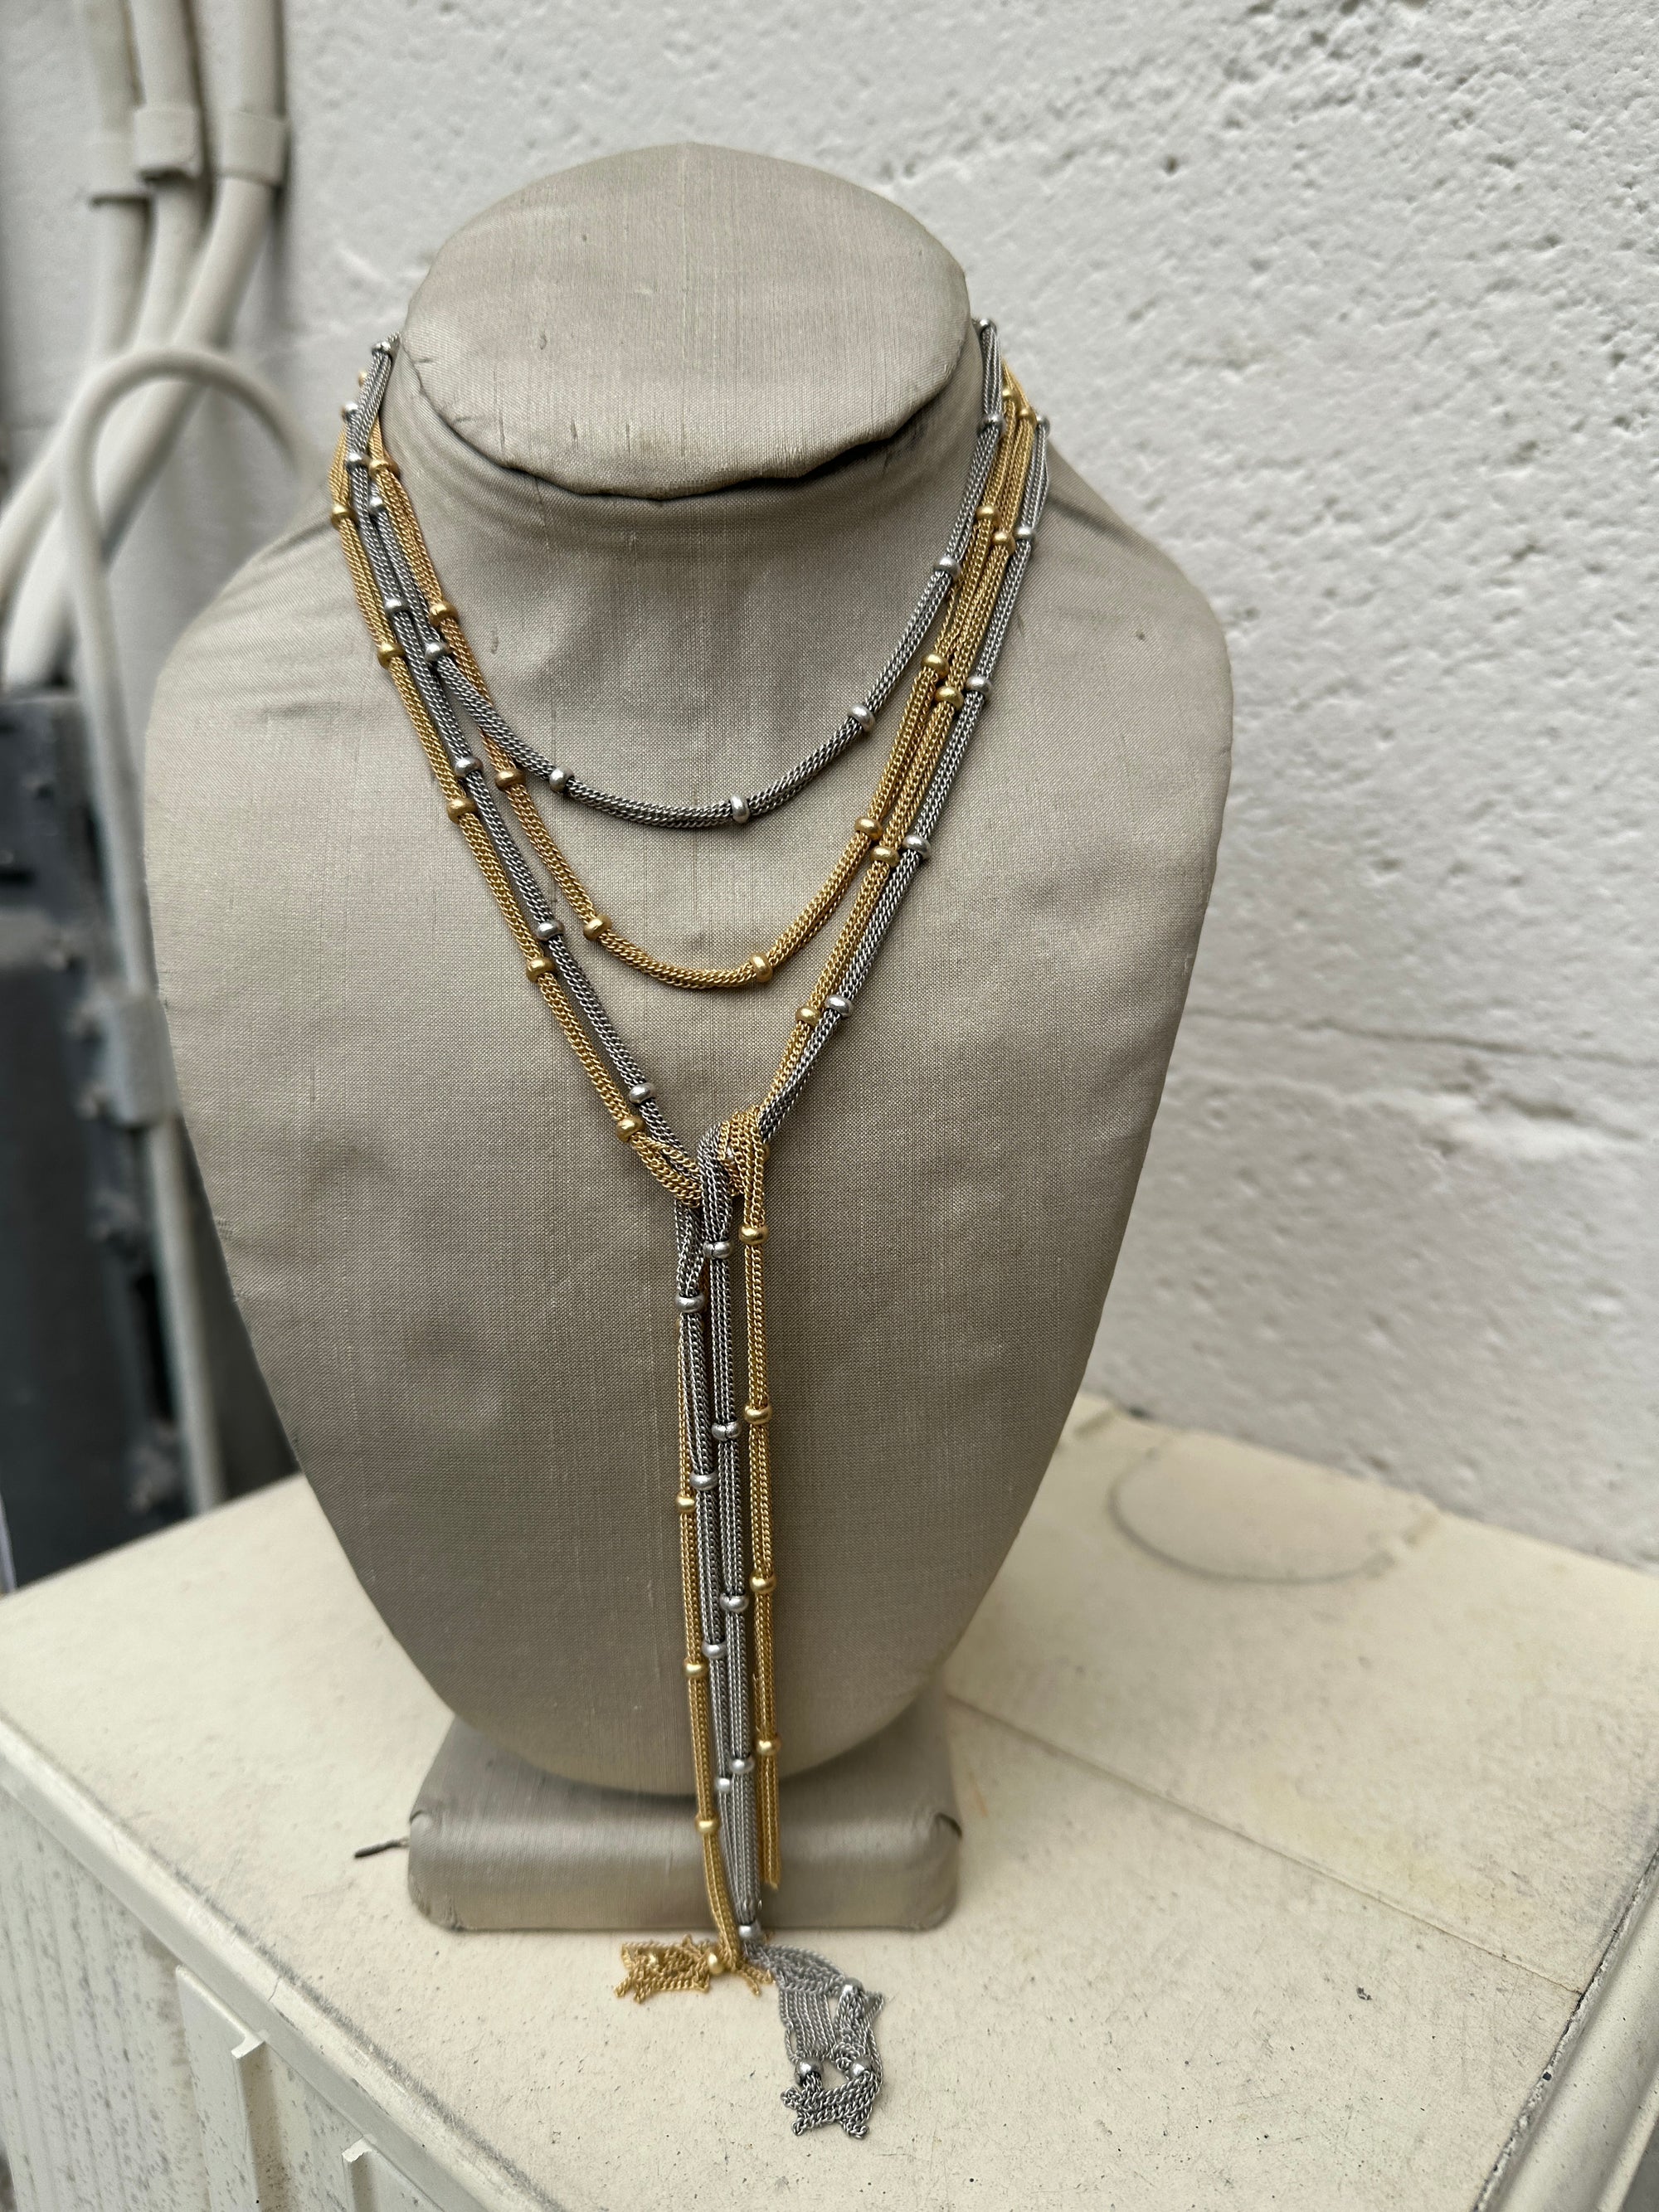 The Wrap Necklace